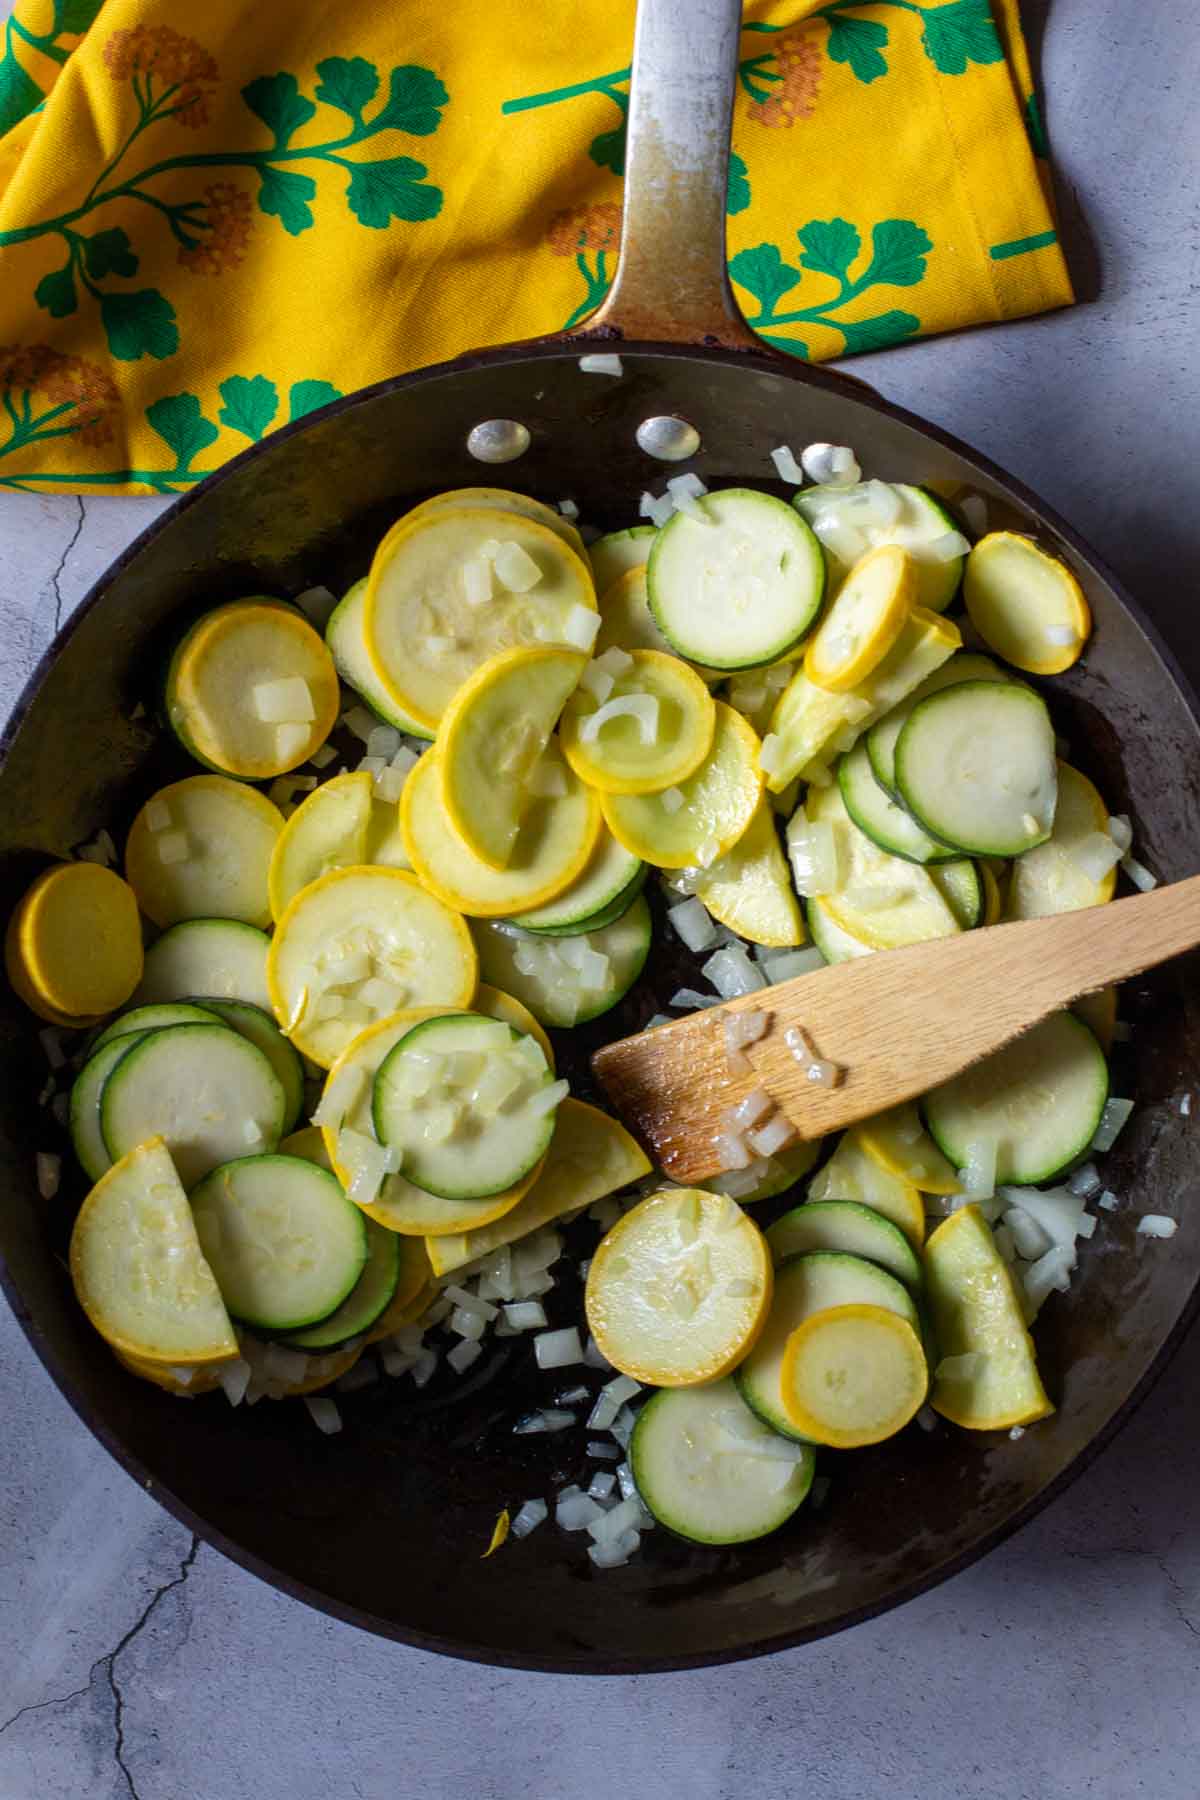 Cooking summer squash and zucchini in a non-stick skillet.